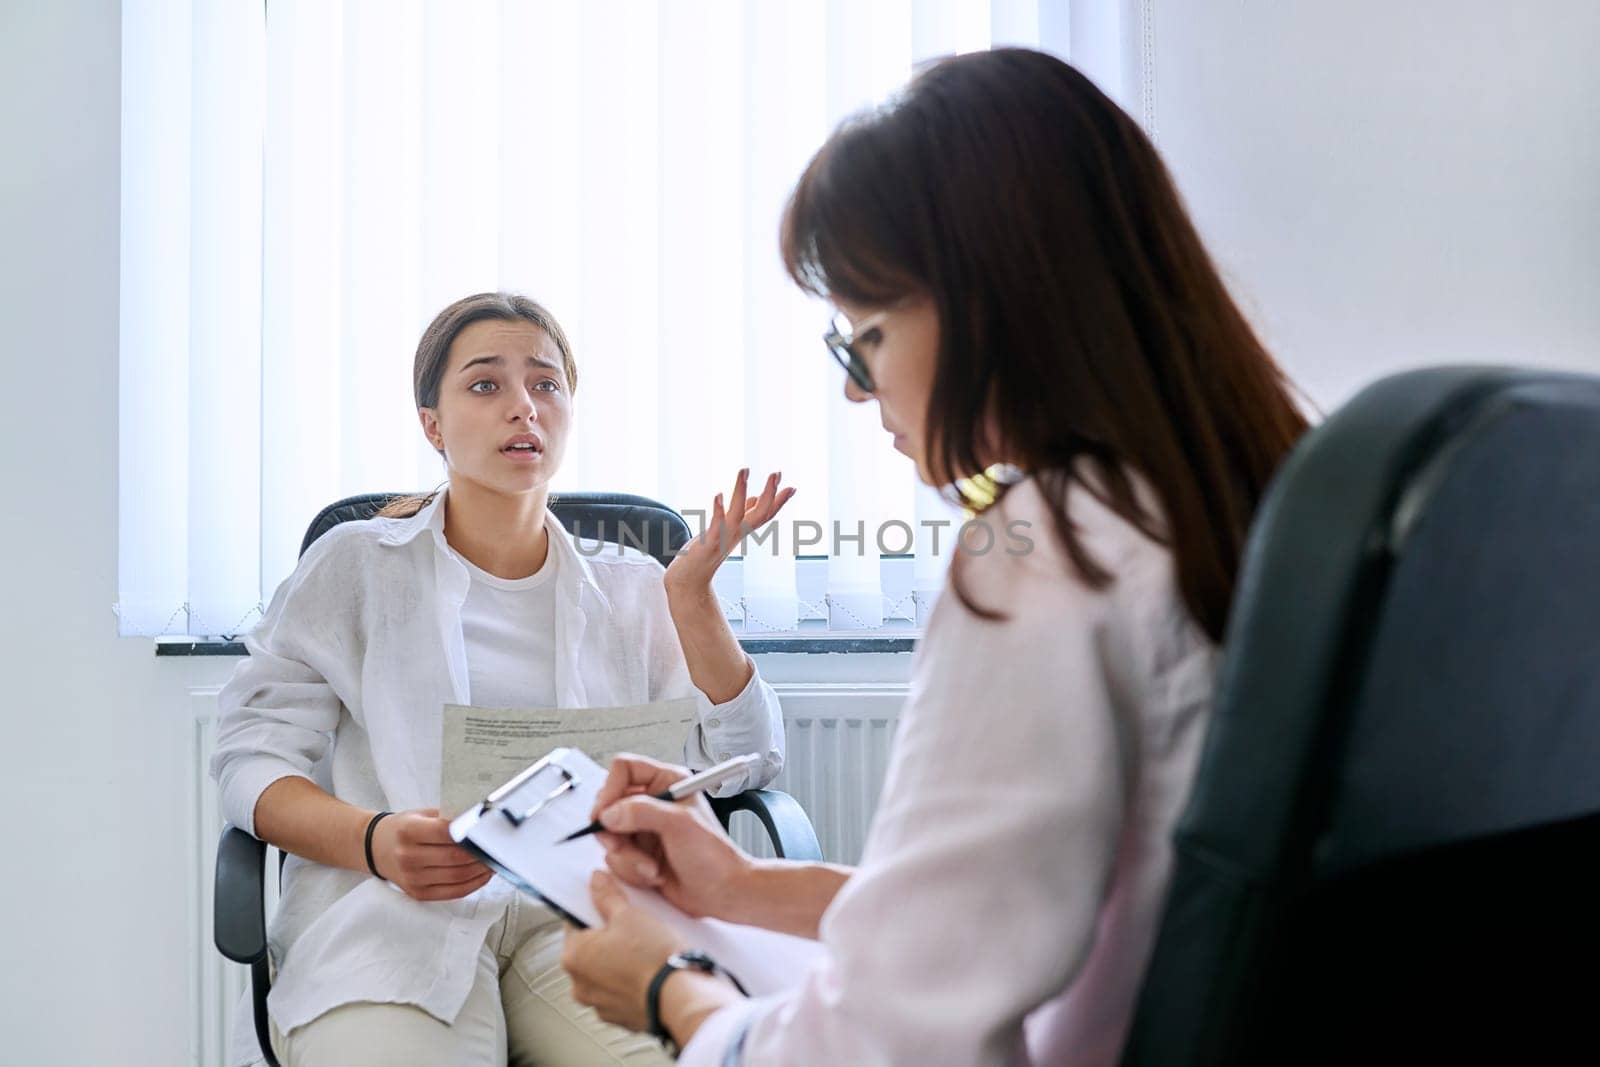 Female teenager at therapy meeting with professional psychologist terapist. Young sad serious girl showing formal mail letter. Psychology, psychotherapy, counseling, mental health of adolescents